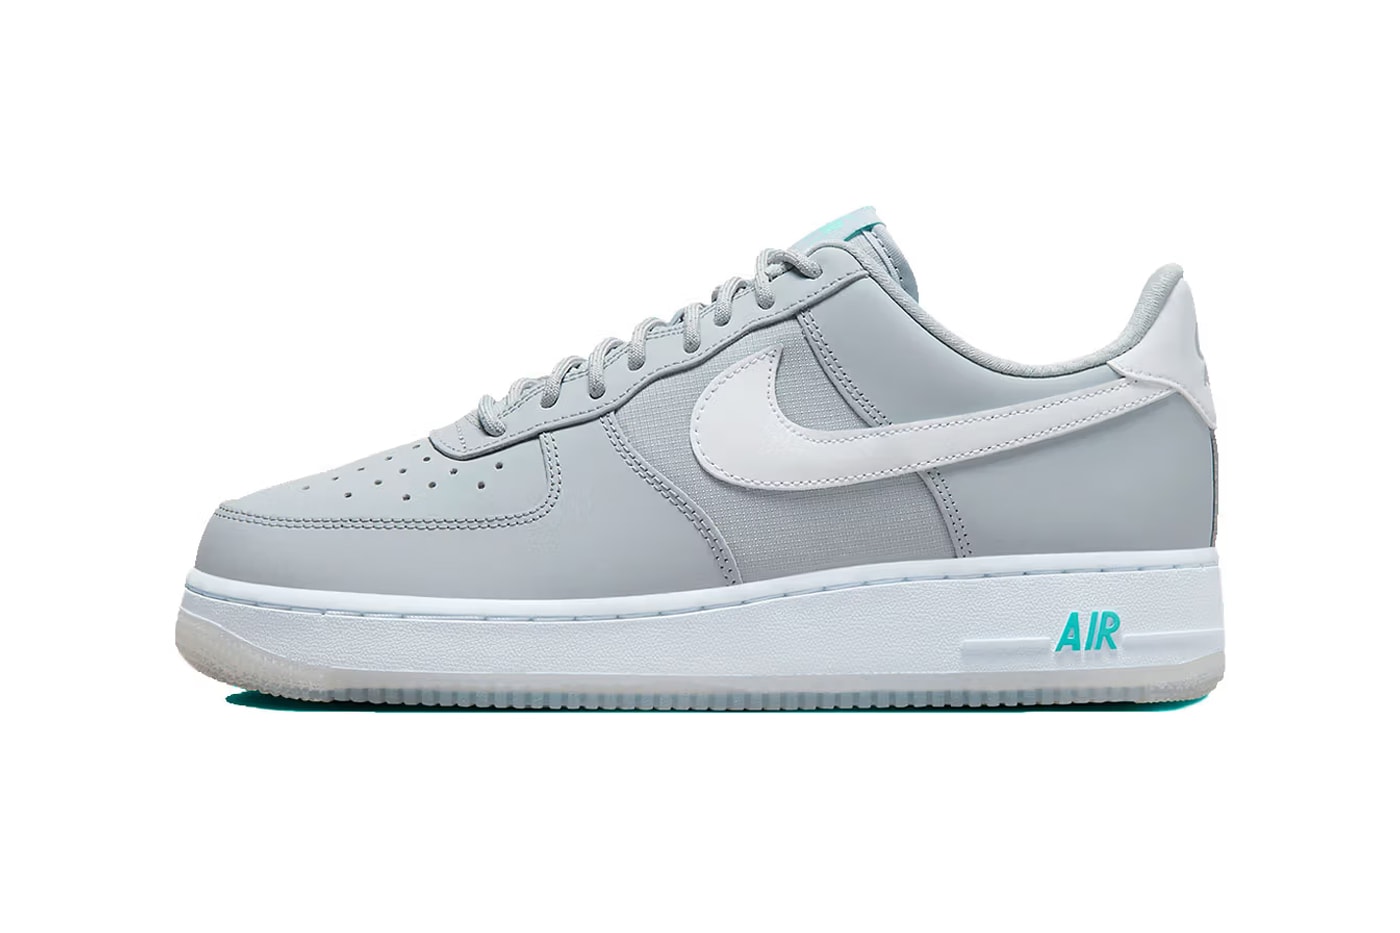 Belichamen vacature Moedig aan Nike Back to the Future Mag Air Force 1 Release | Hypebeast